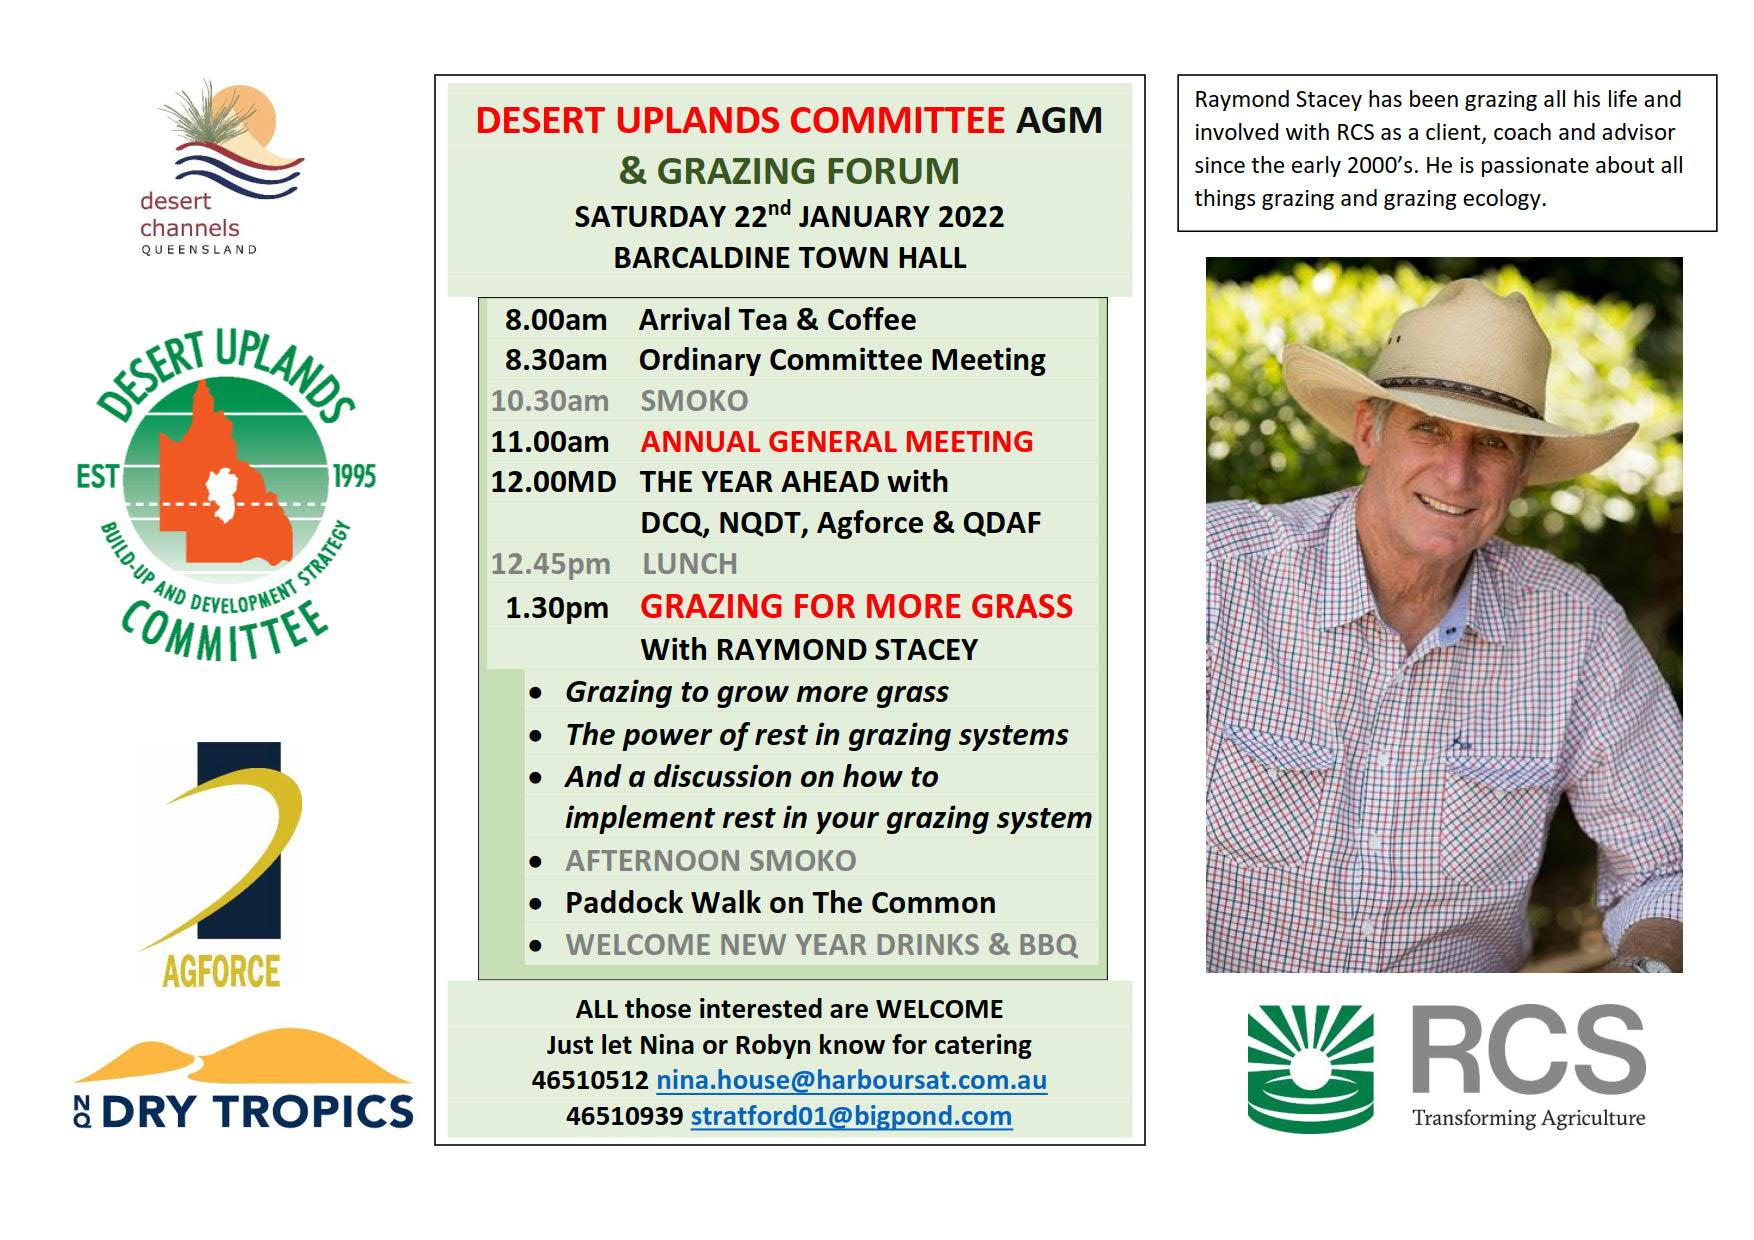 Desert Uplands Committee AGM and Grazing Forum